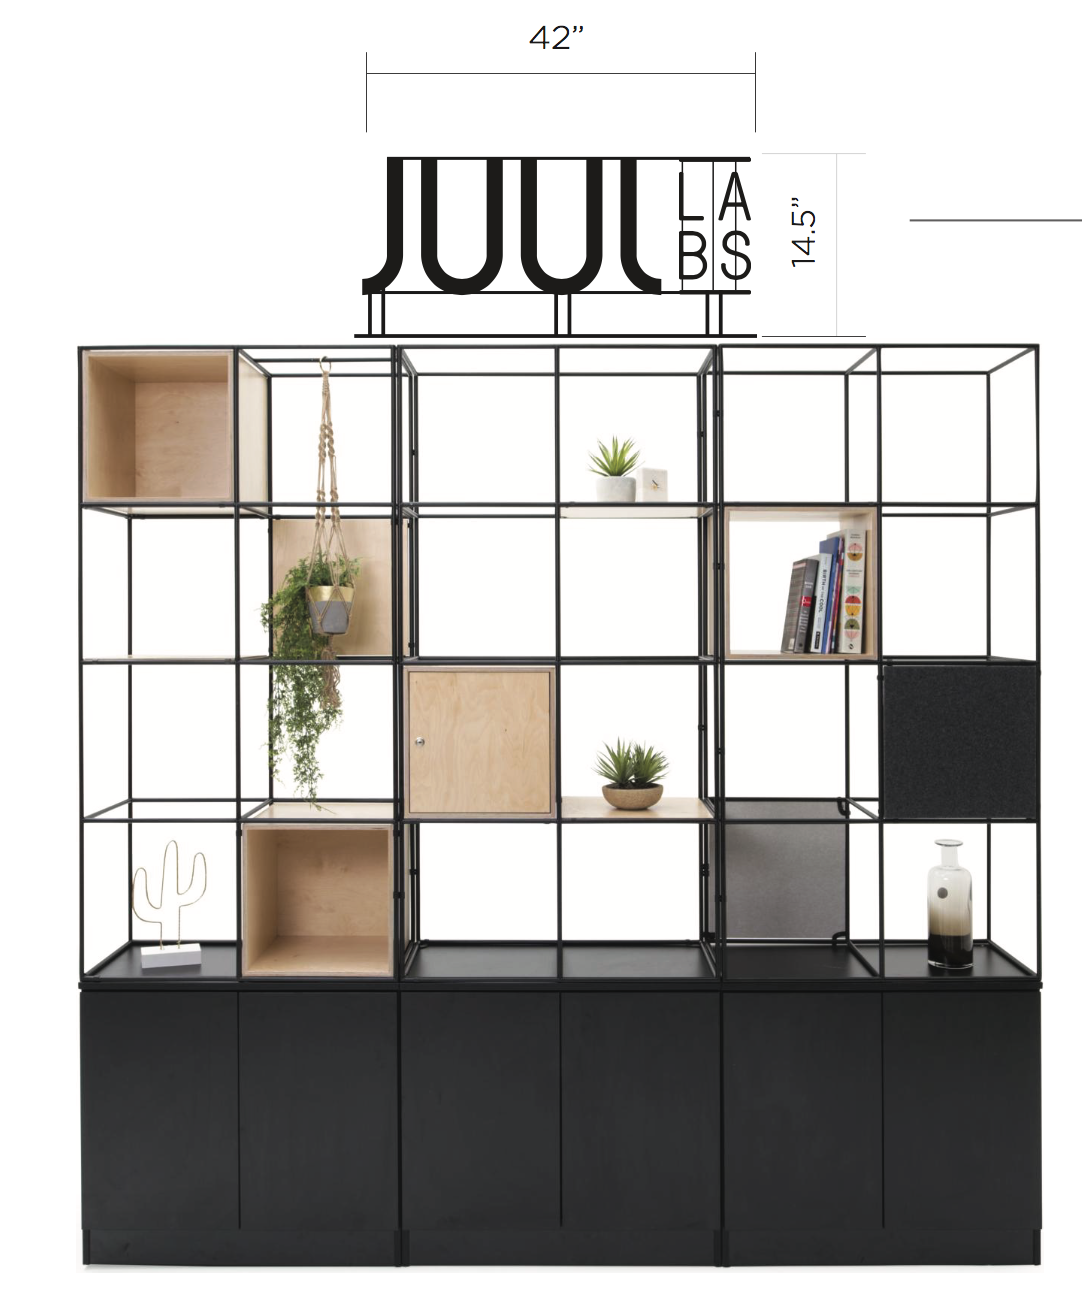 Black metal floating letter shelf sign for the San Francisco office of Juul, an electronic cigarette company.